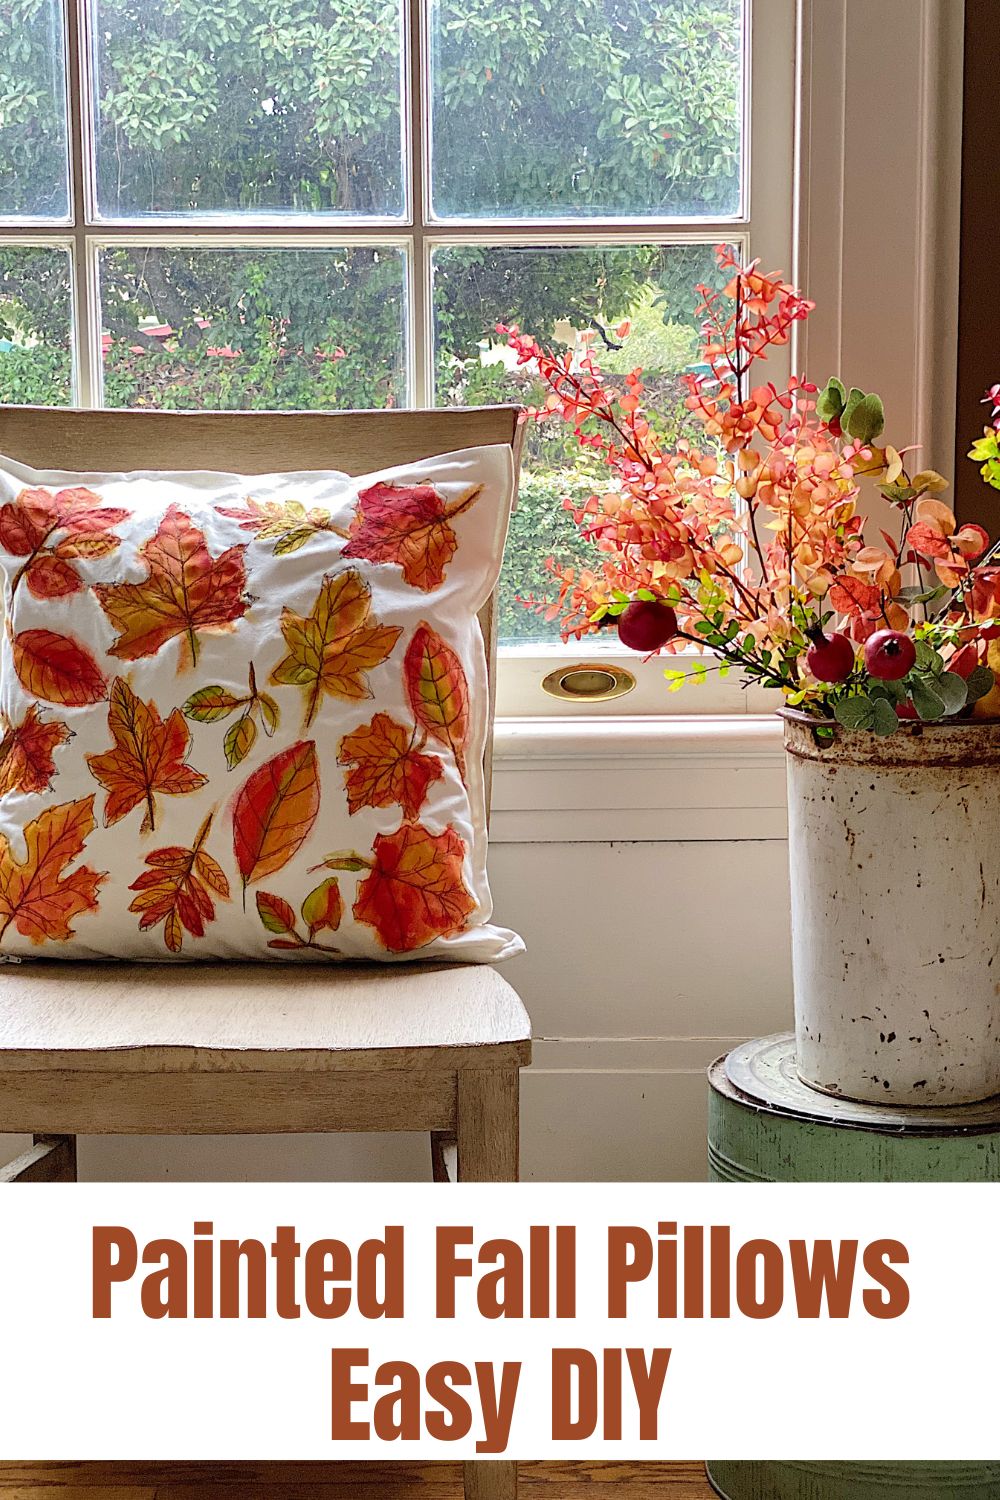 I love the new DIY Pillow that I made with paint and Free Motion Embroidery! I Combined Two Of My Favorite Passions, Art And Sewing. Now I have new Painted Fall Pillows.